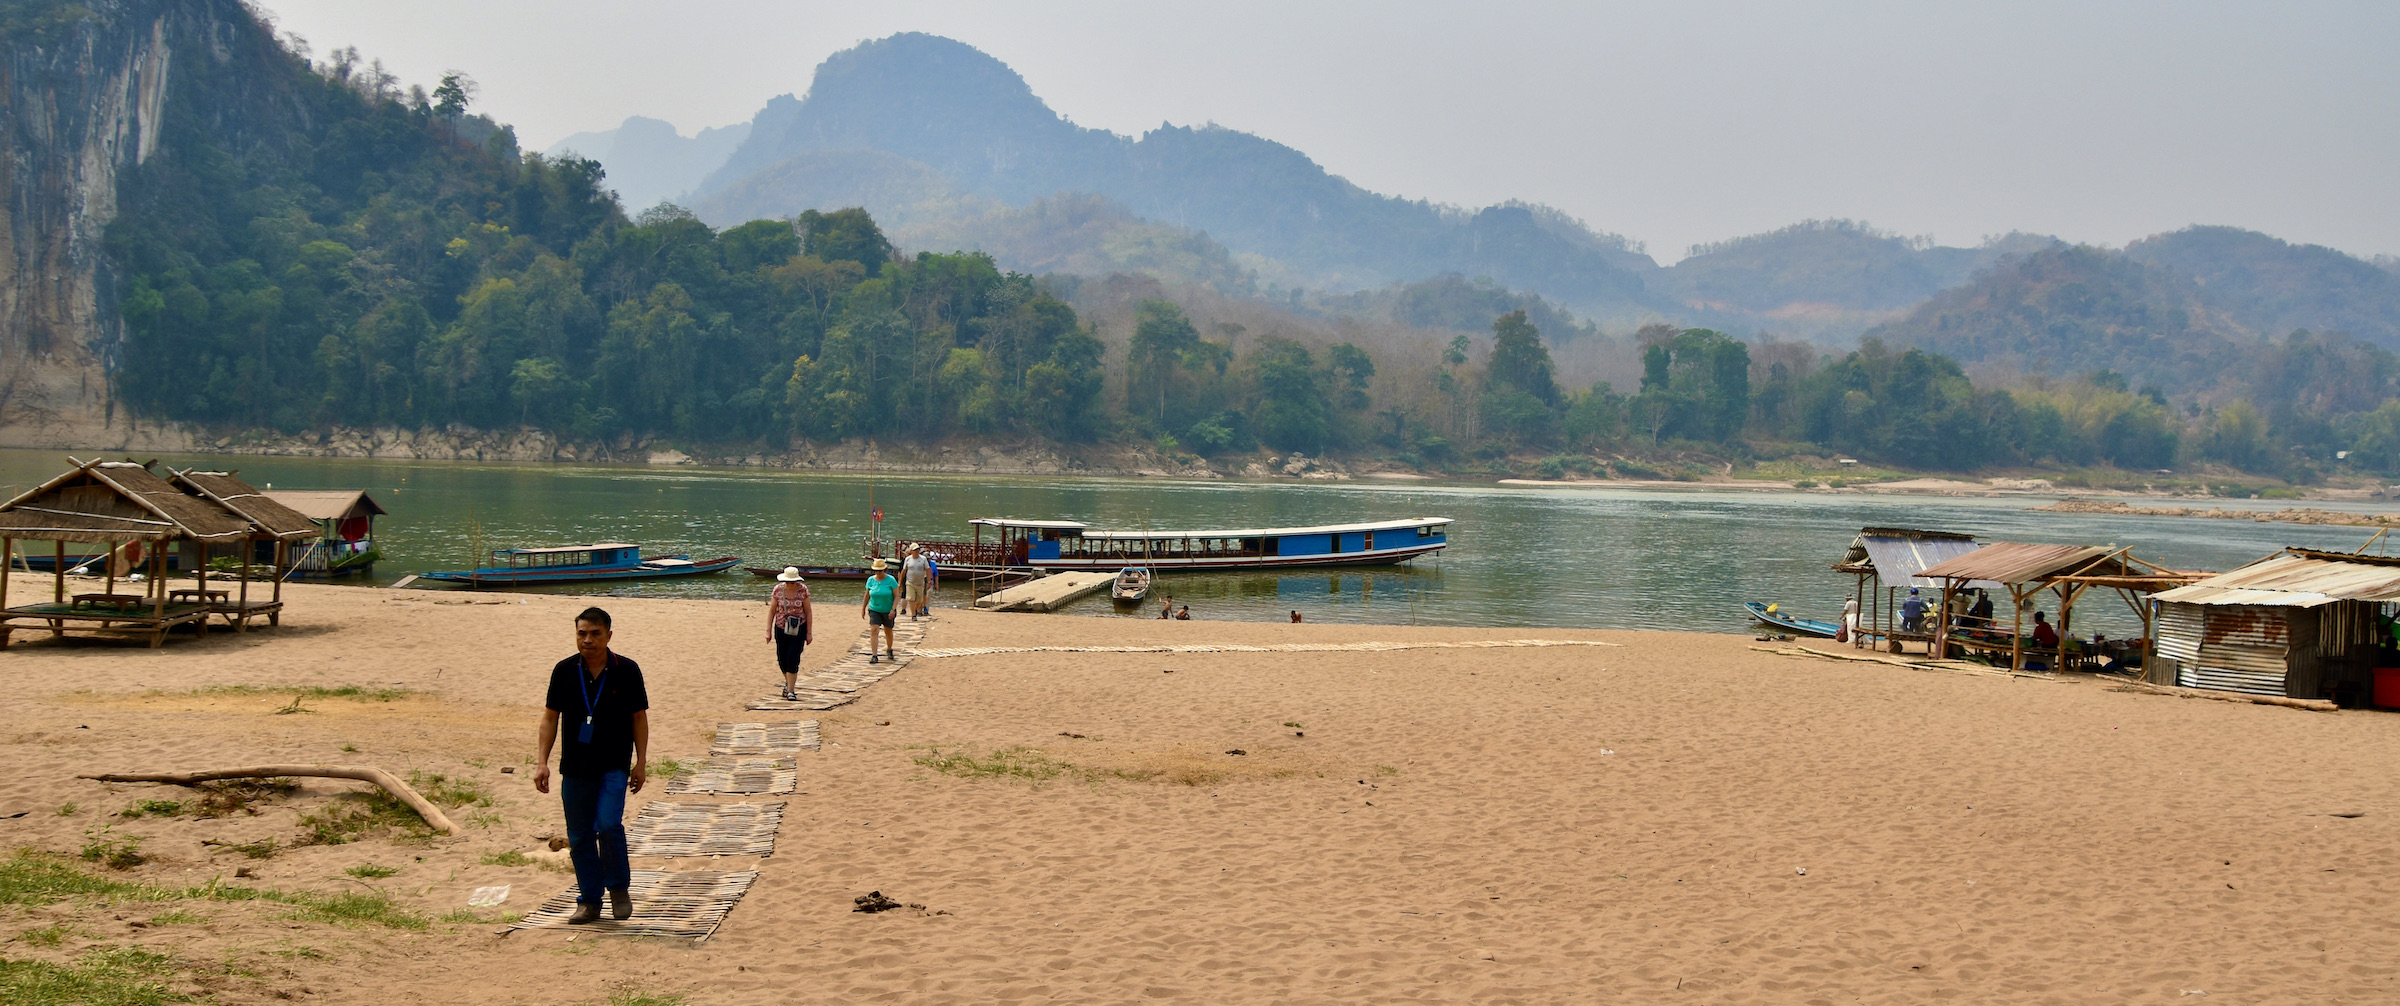 Heading for Lunch on the Mekong River